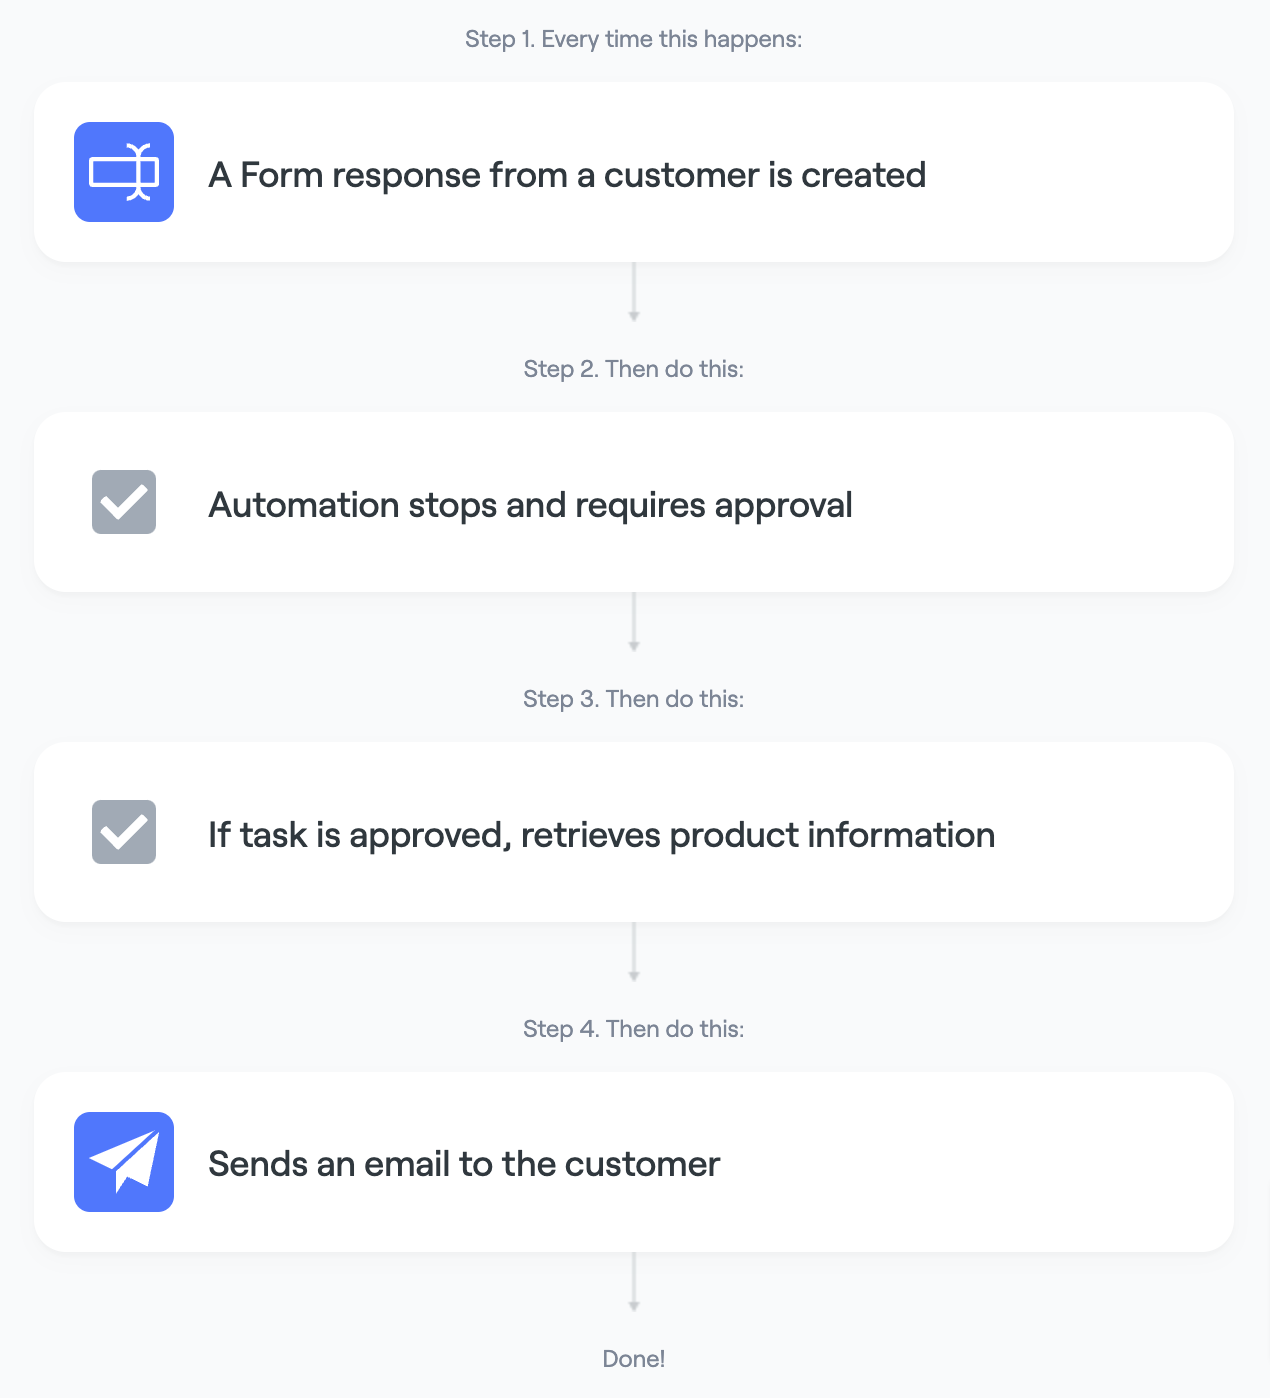 Notify customers on a product waitlist when a form response is received